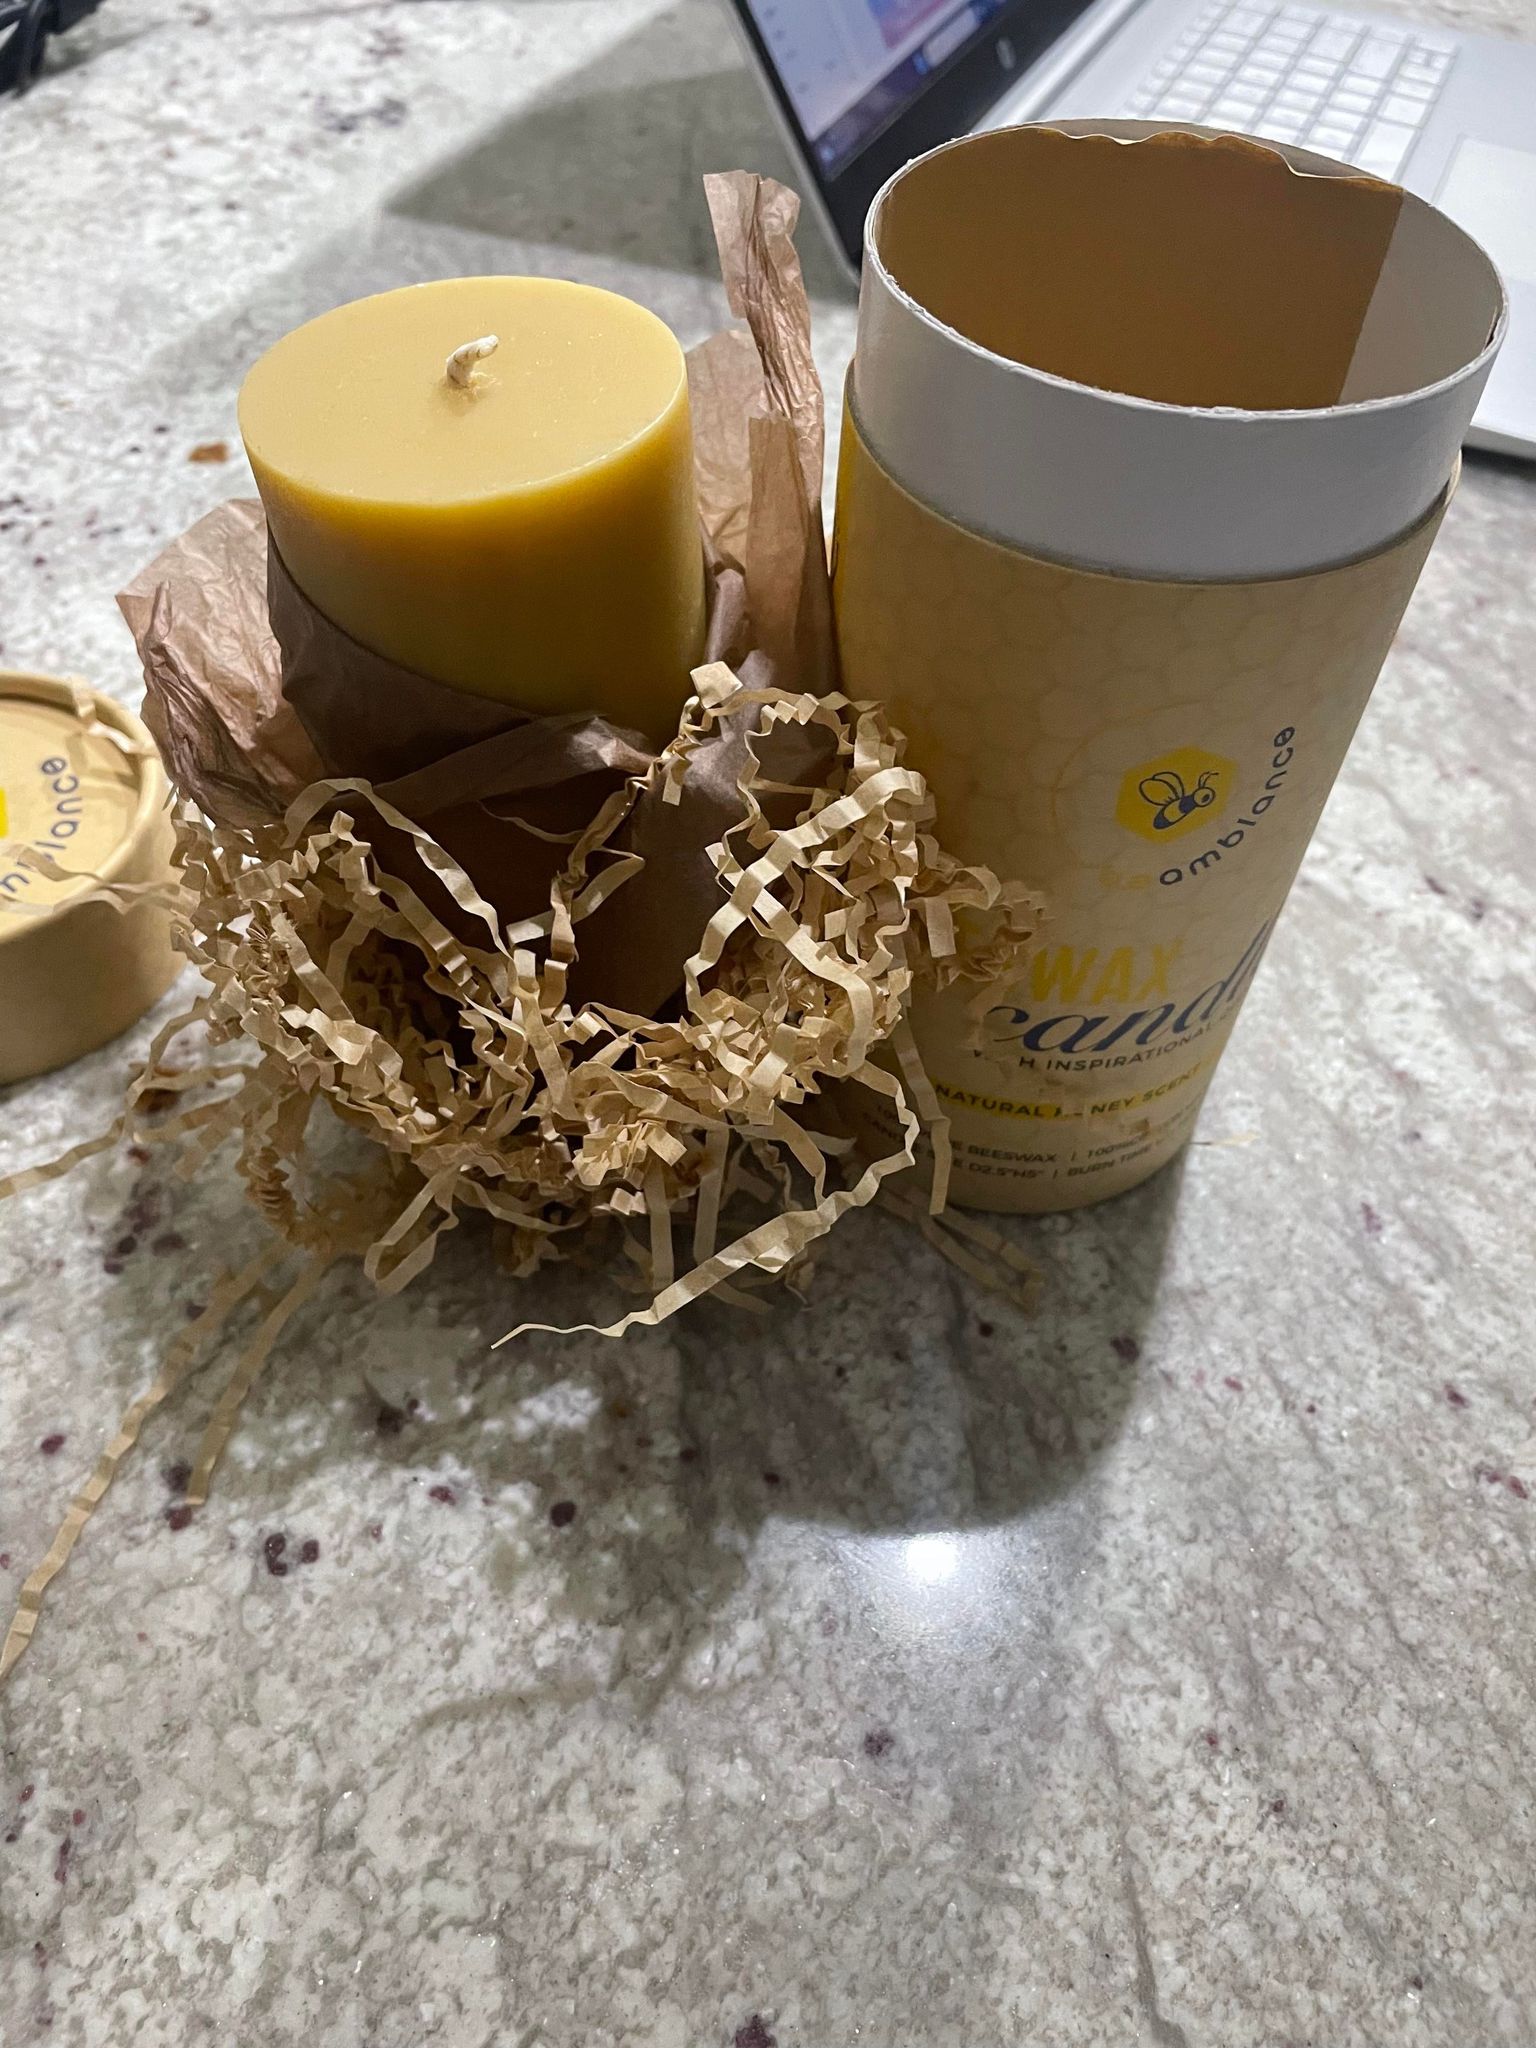 This Mothers Day Gift BeAmbiance Candles